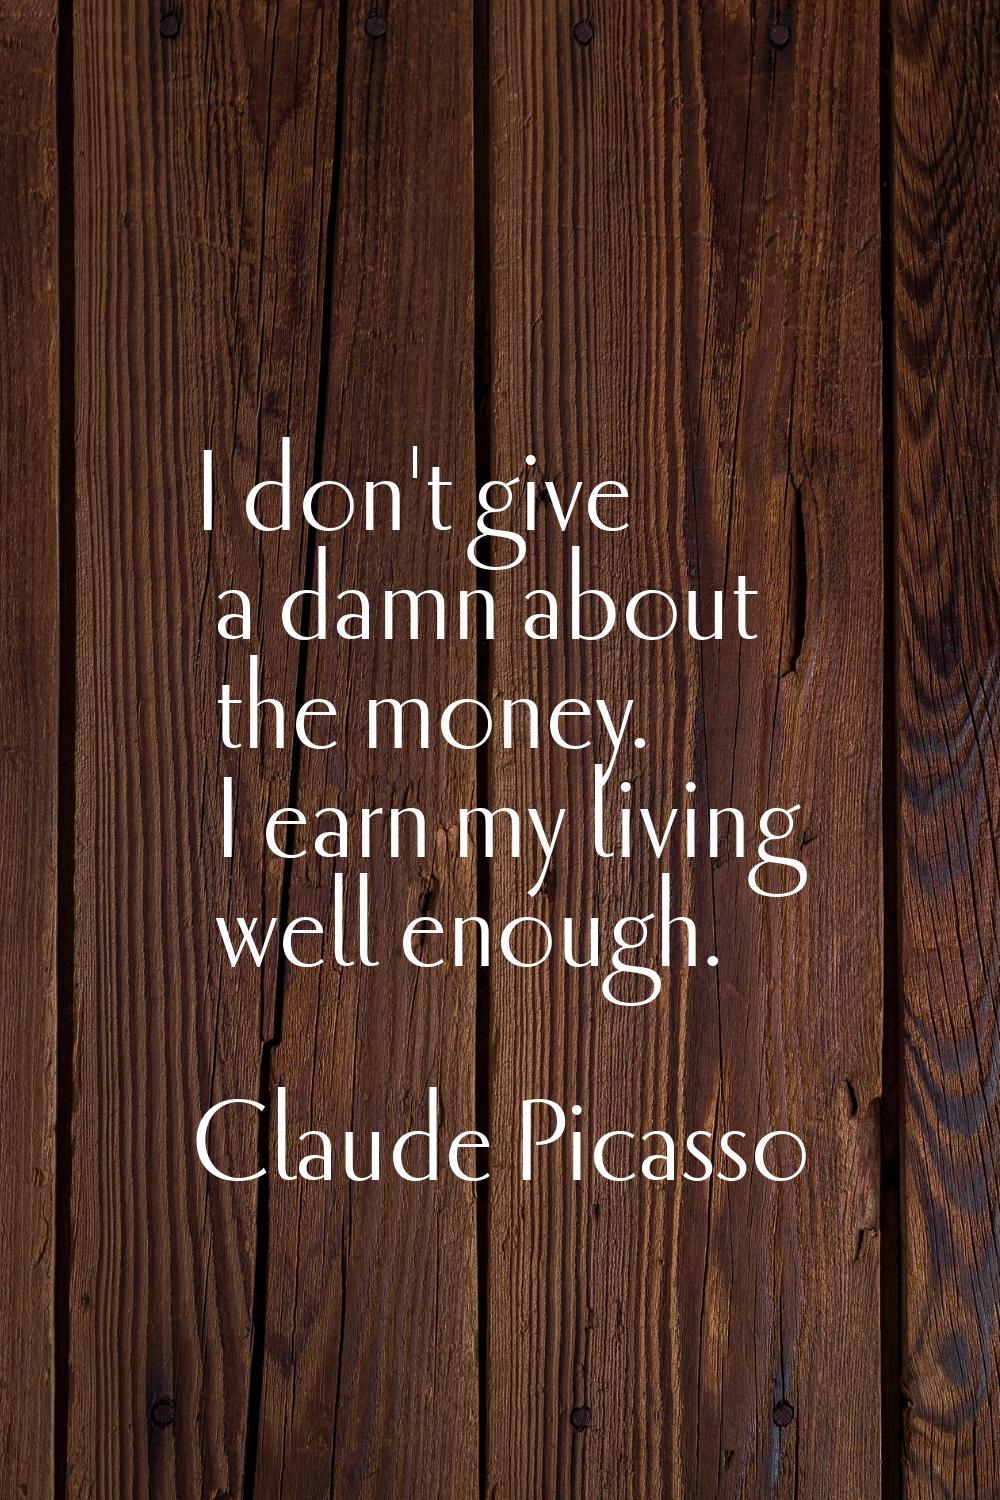 I don't give a damn about the money. I earn my living well enough.